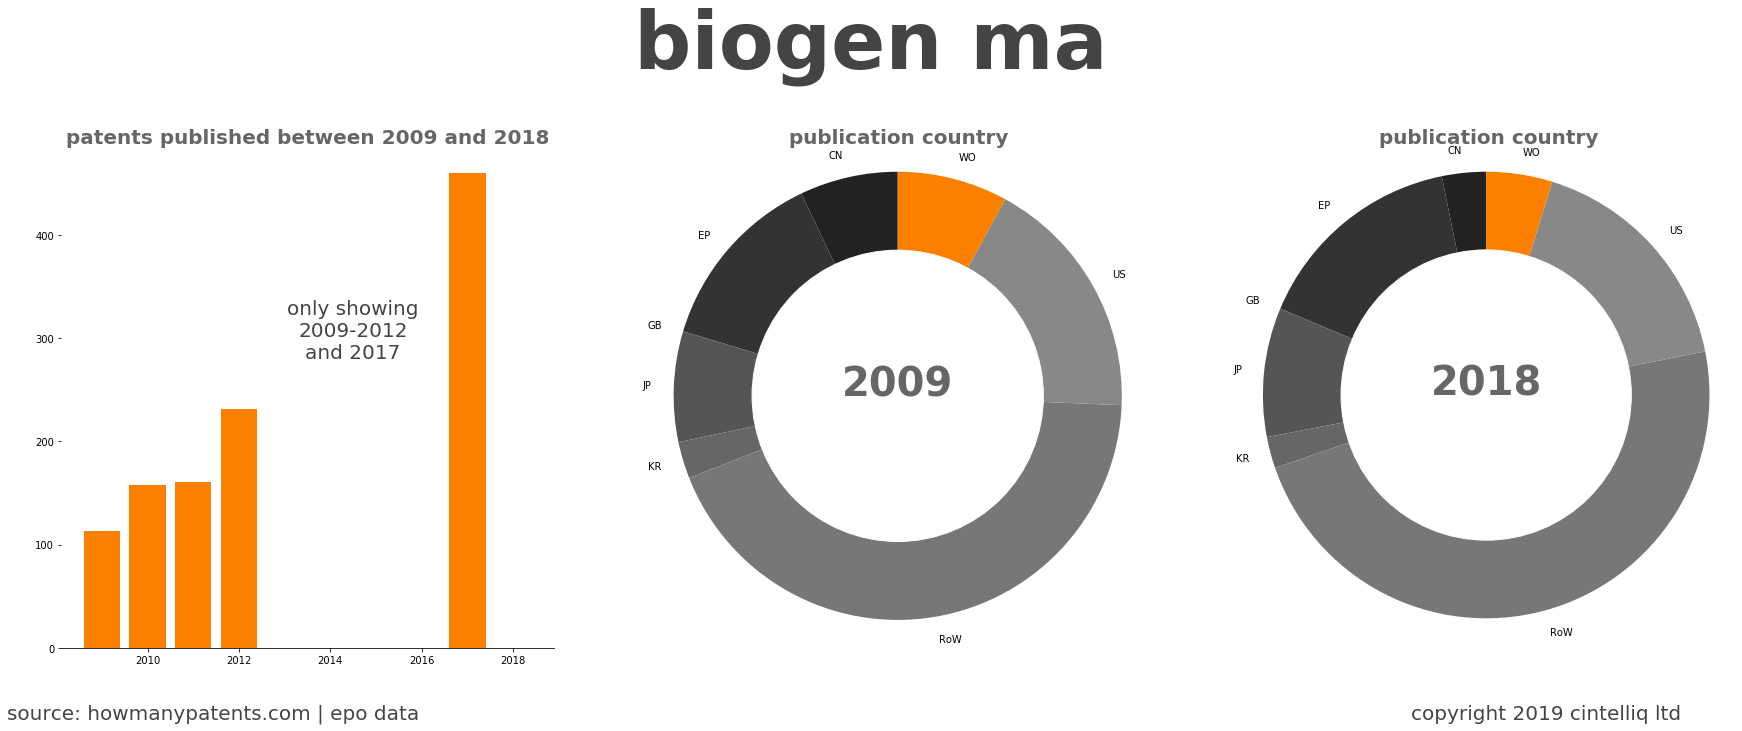 summary of patents for Biogen Ma